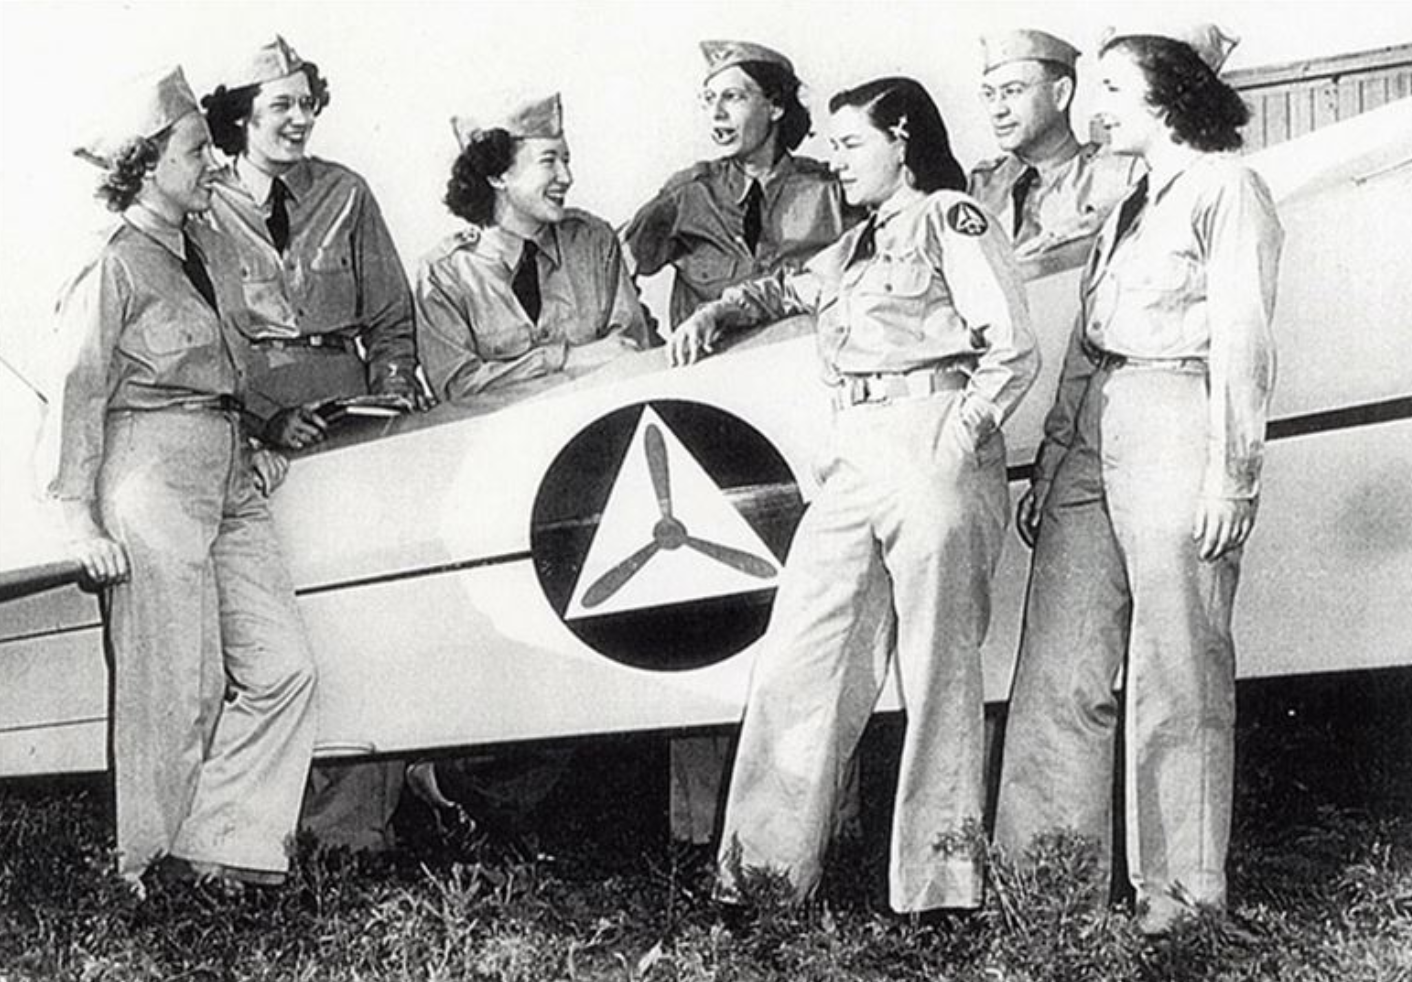 The Civil Air Patrol was open to all races and genders from the get-go. All you needed was a radio and a plane you could fly. (Civil Air Patrol)